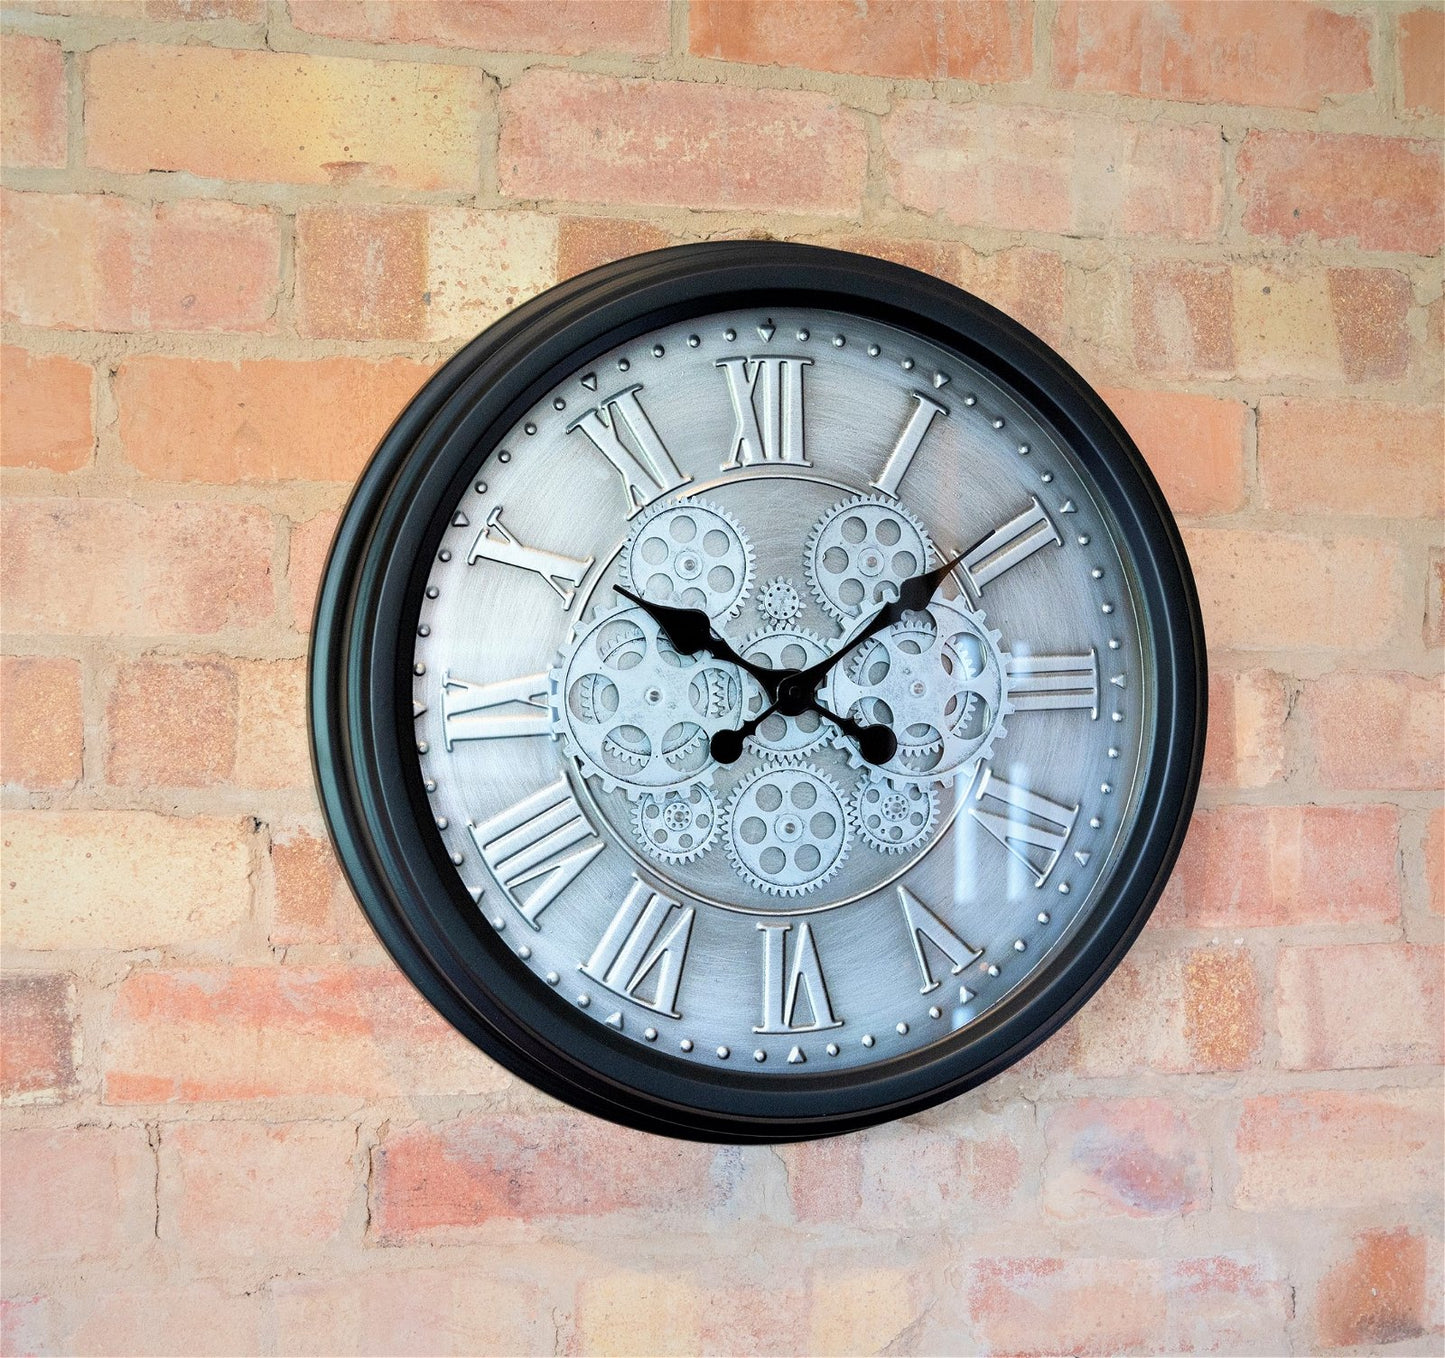 Moving Gear Clock with Roman Numerals